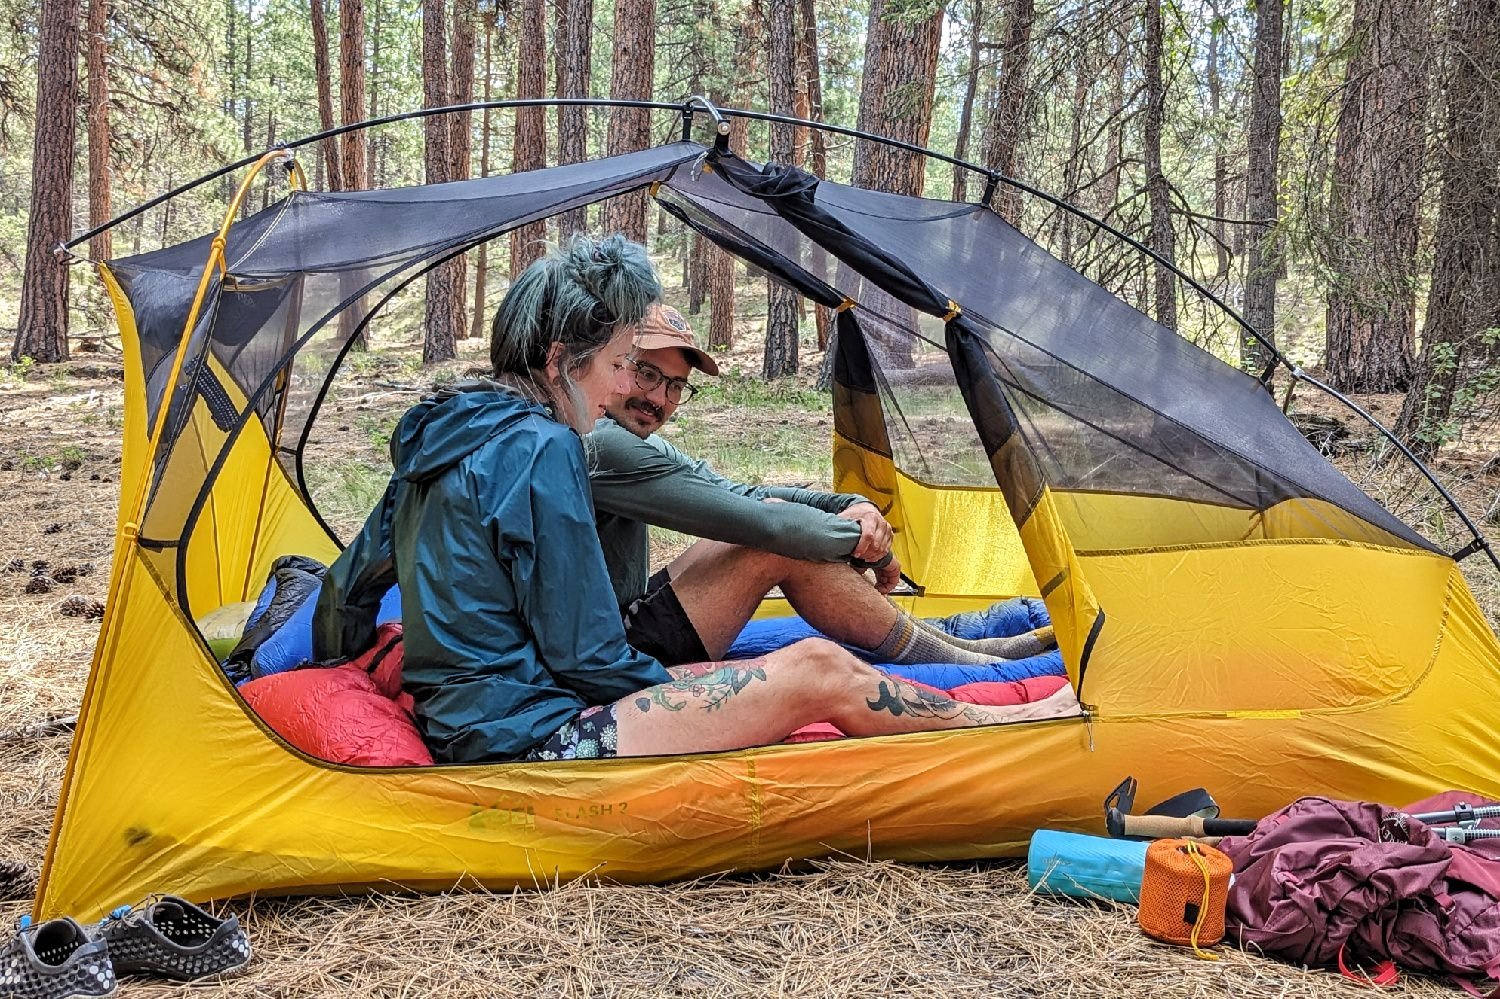 Two hikers sitting in a tent together and talking in a forested campsite